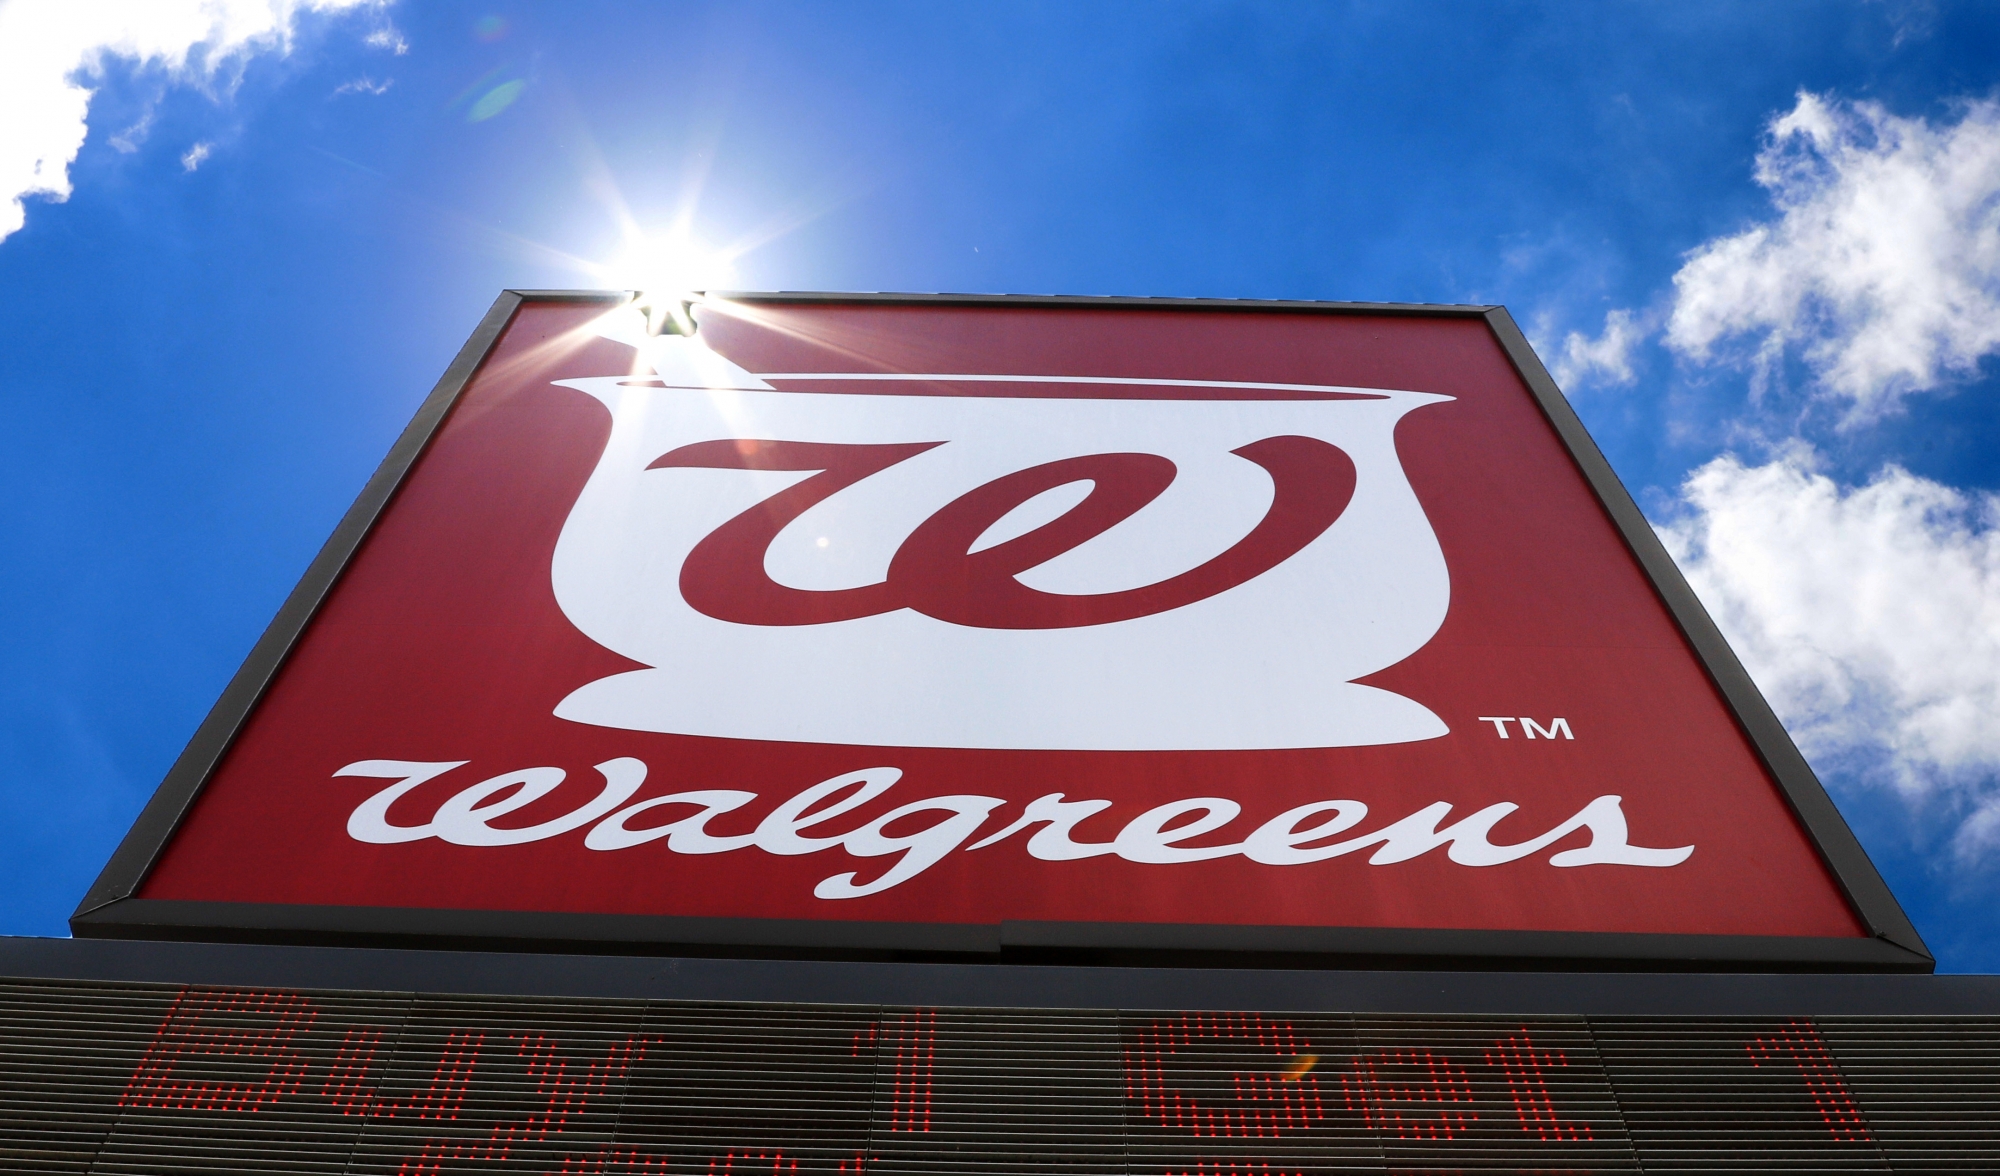 walgreens-to-sell-drug-wholesale-business-for-6-5b-wtop-news